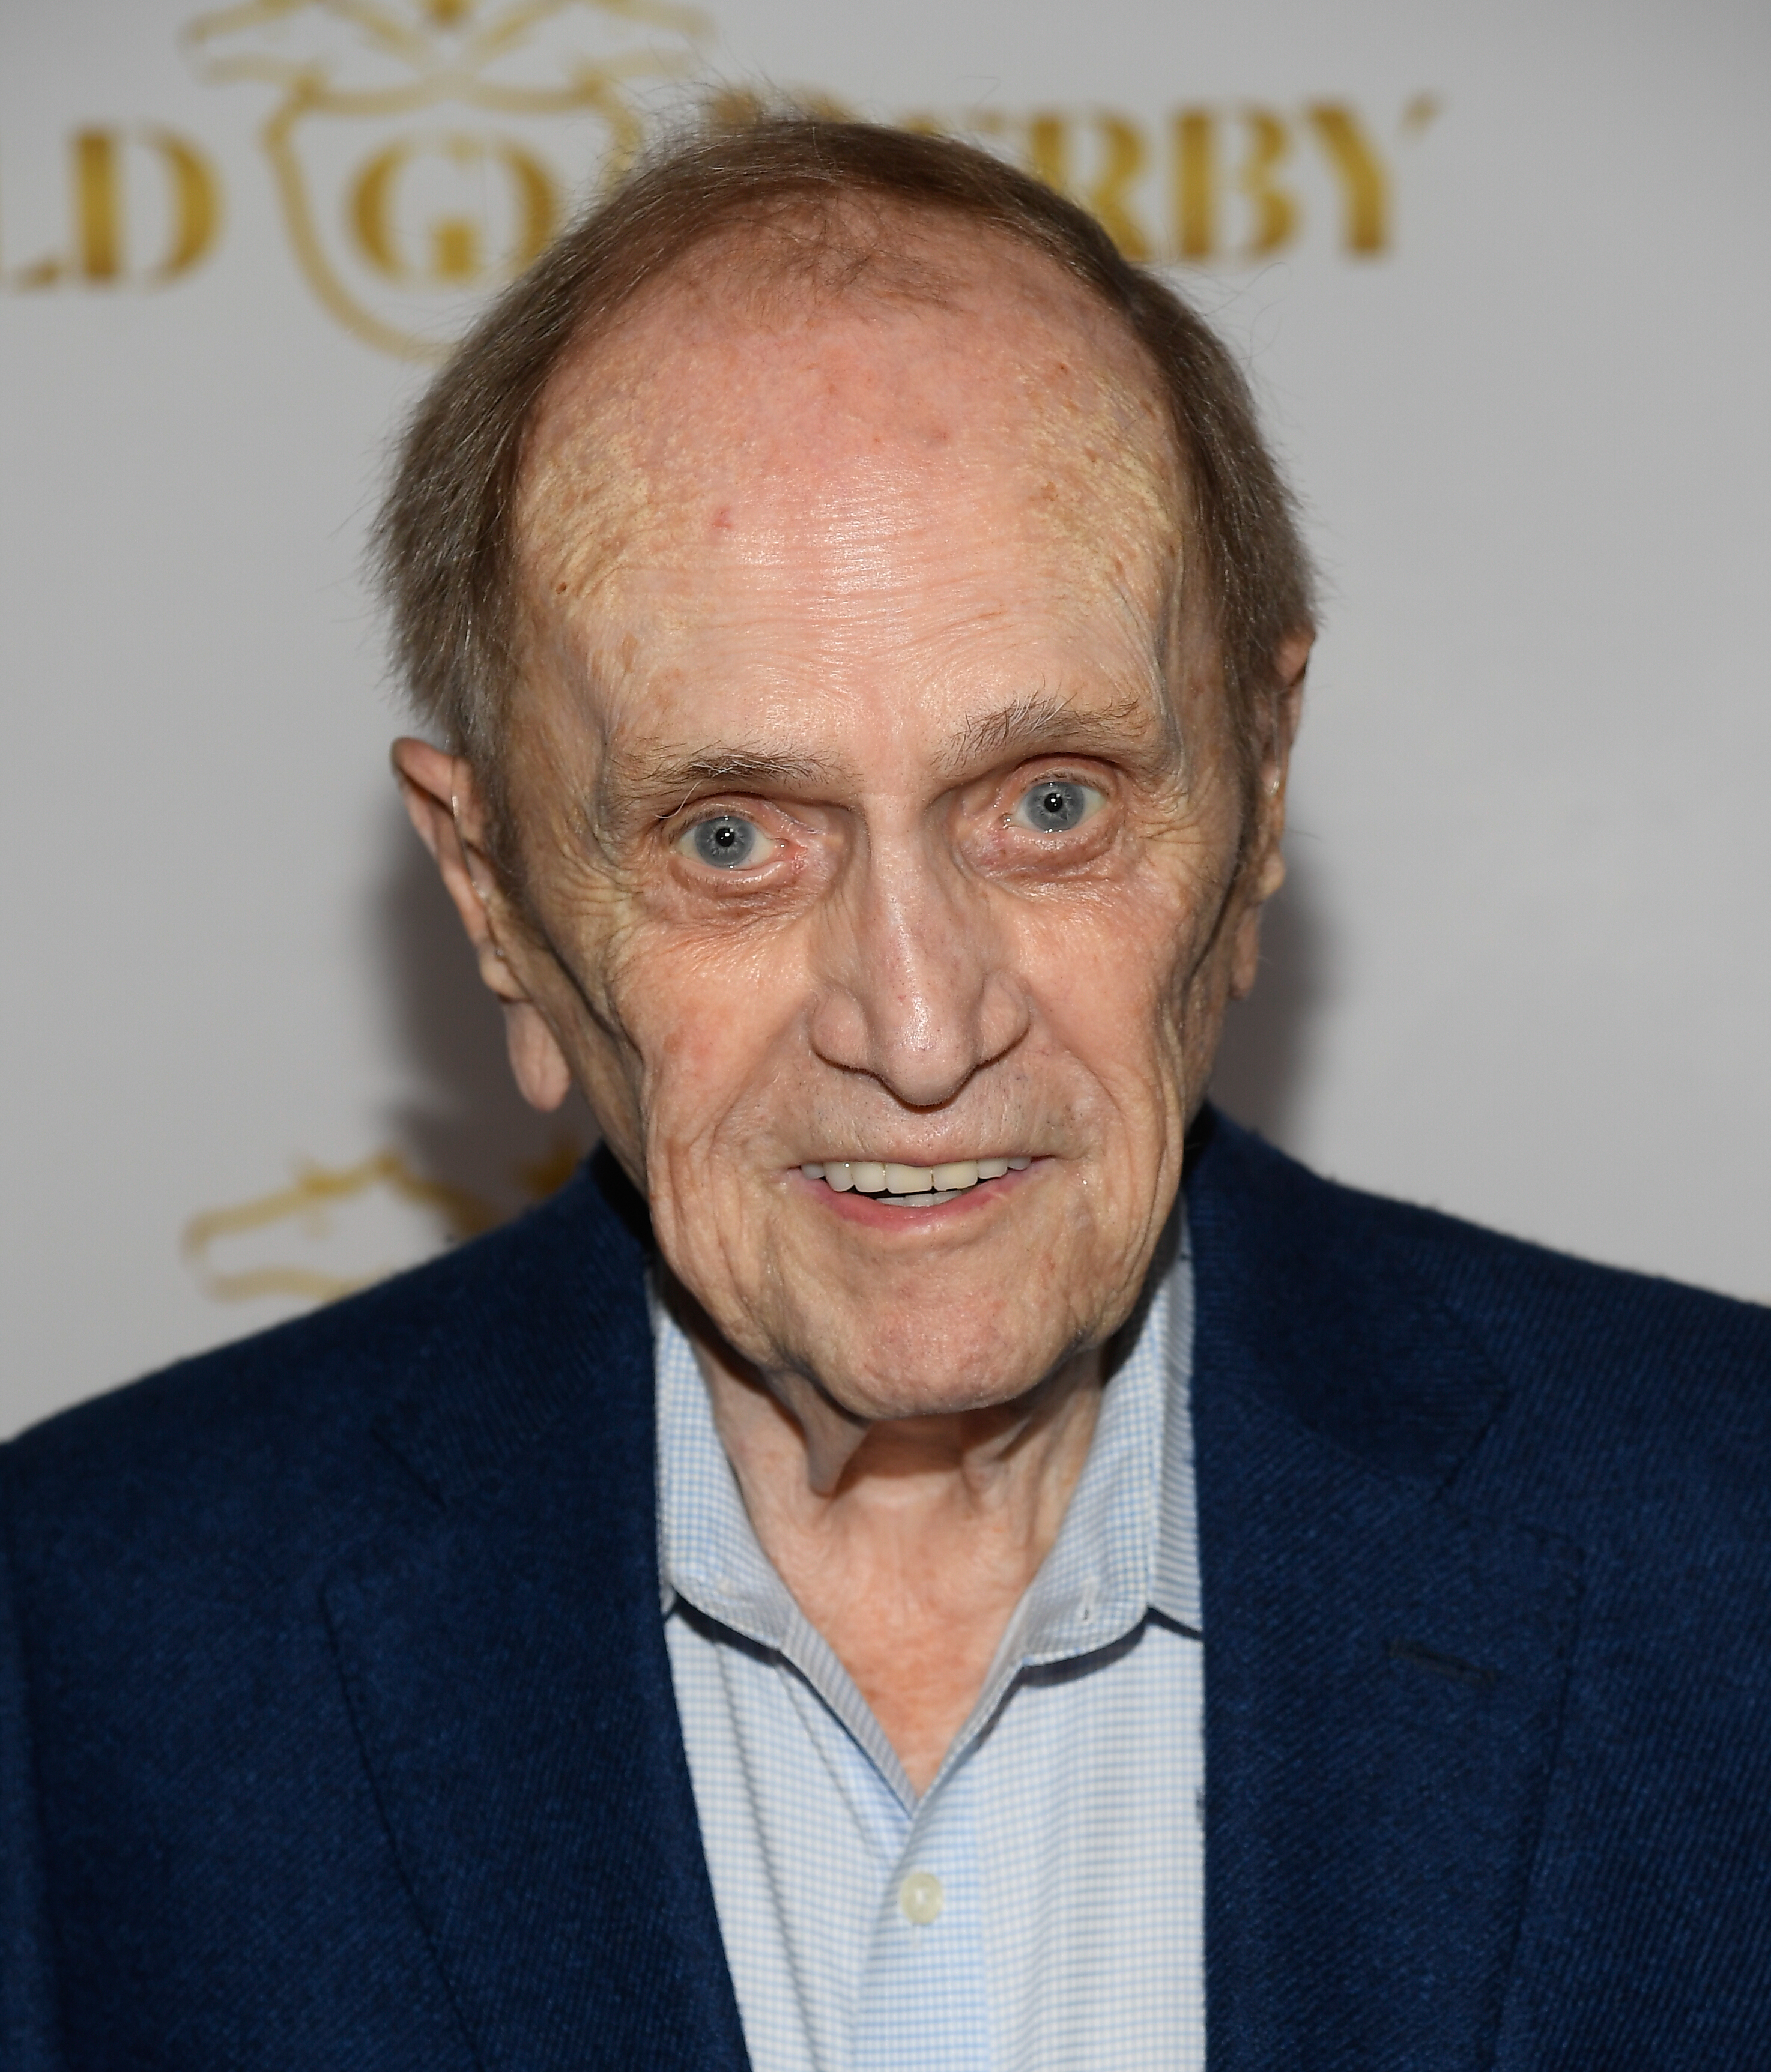 Bob Newhart at the Gold Derby Emmys kickoff party in 2019 | Source: Getty Images